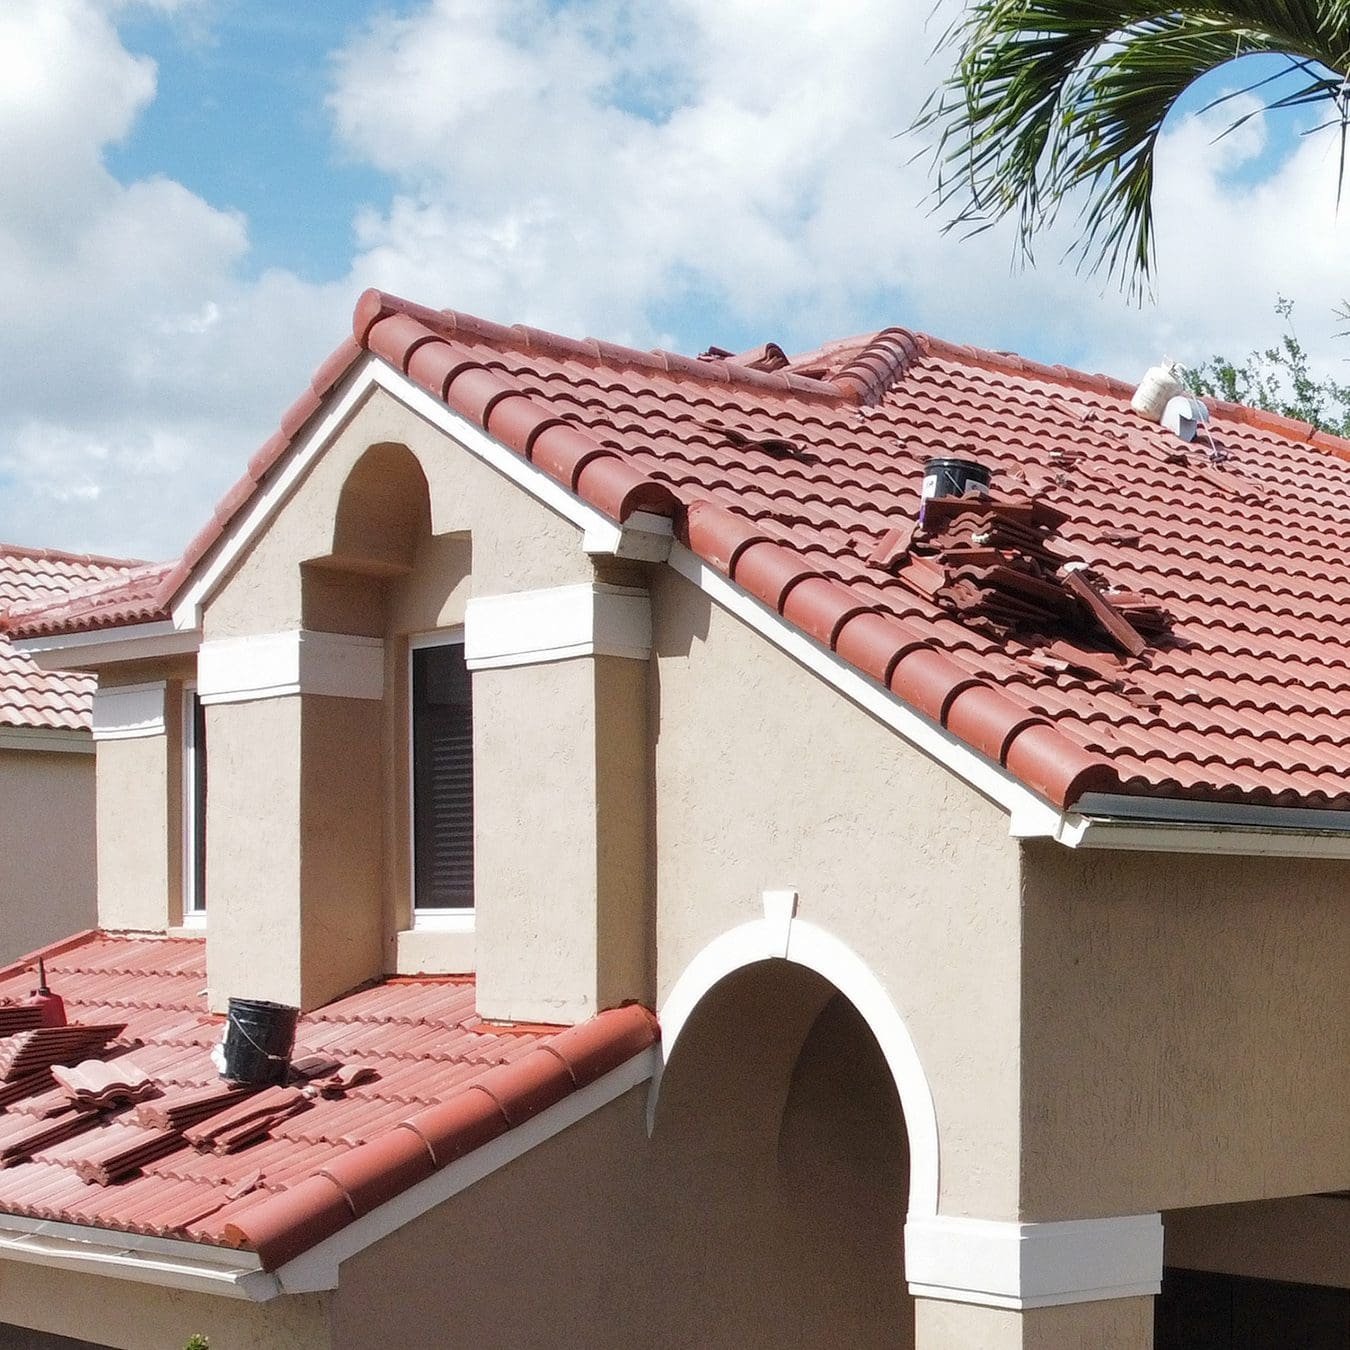 Tile roof installation in progress for one of our projects in Pembroke Pines